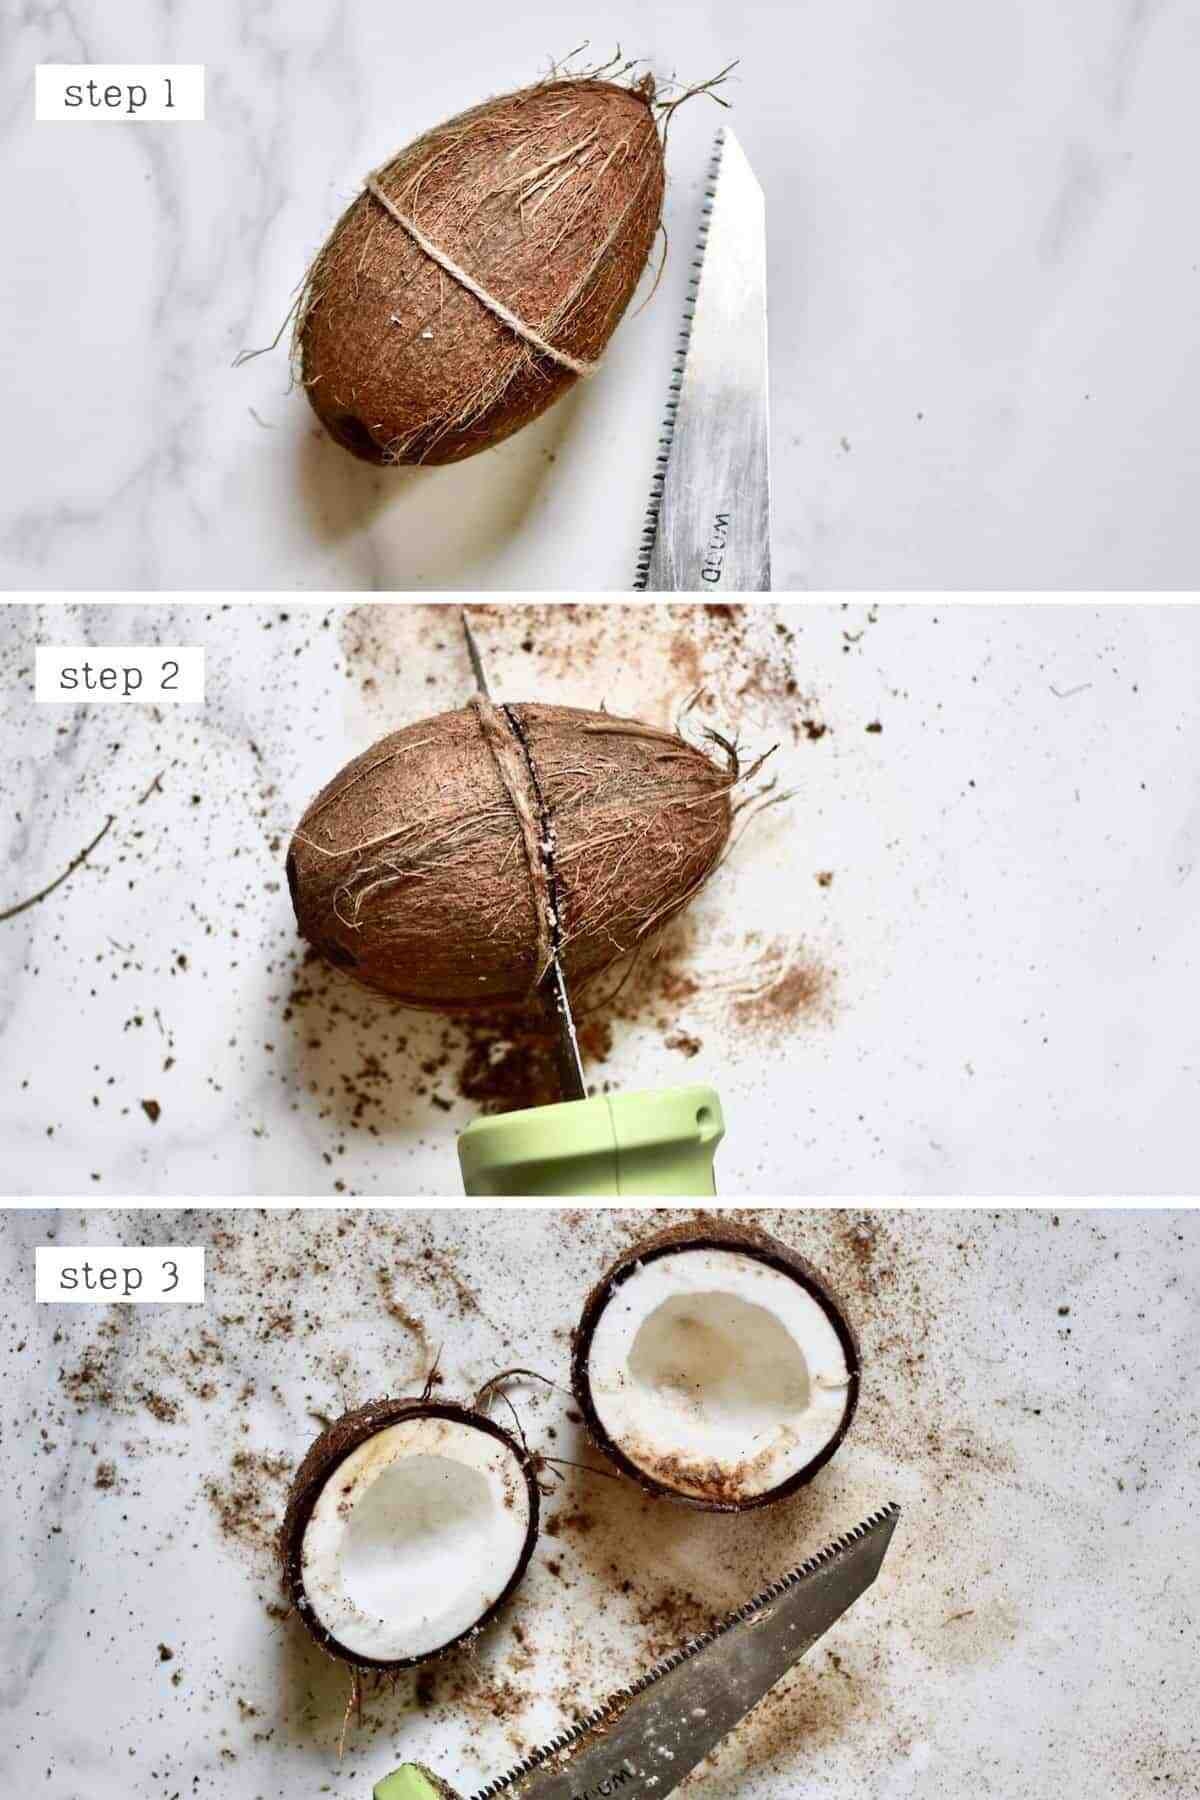 How do I crack a green coconut at home?